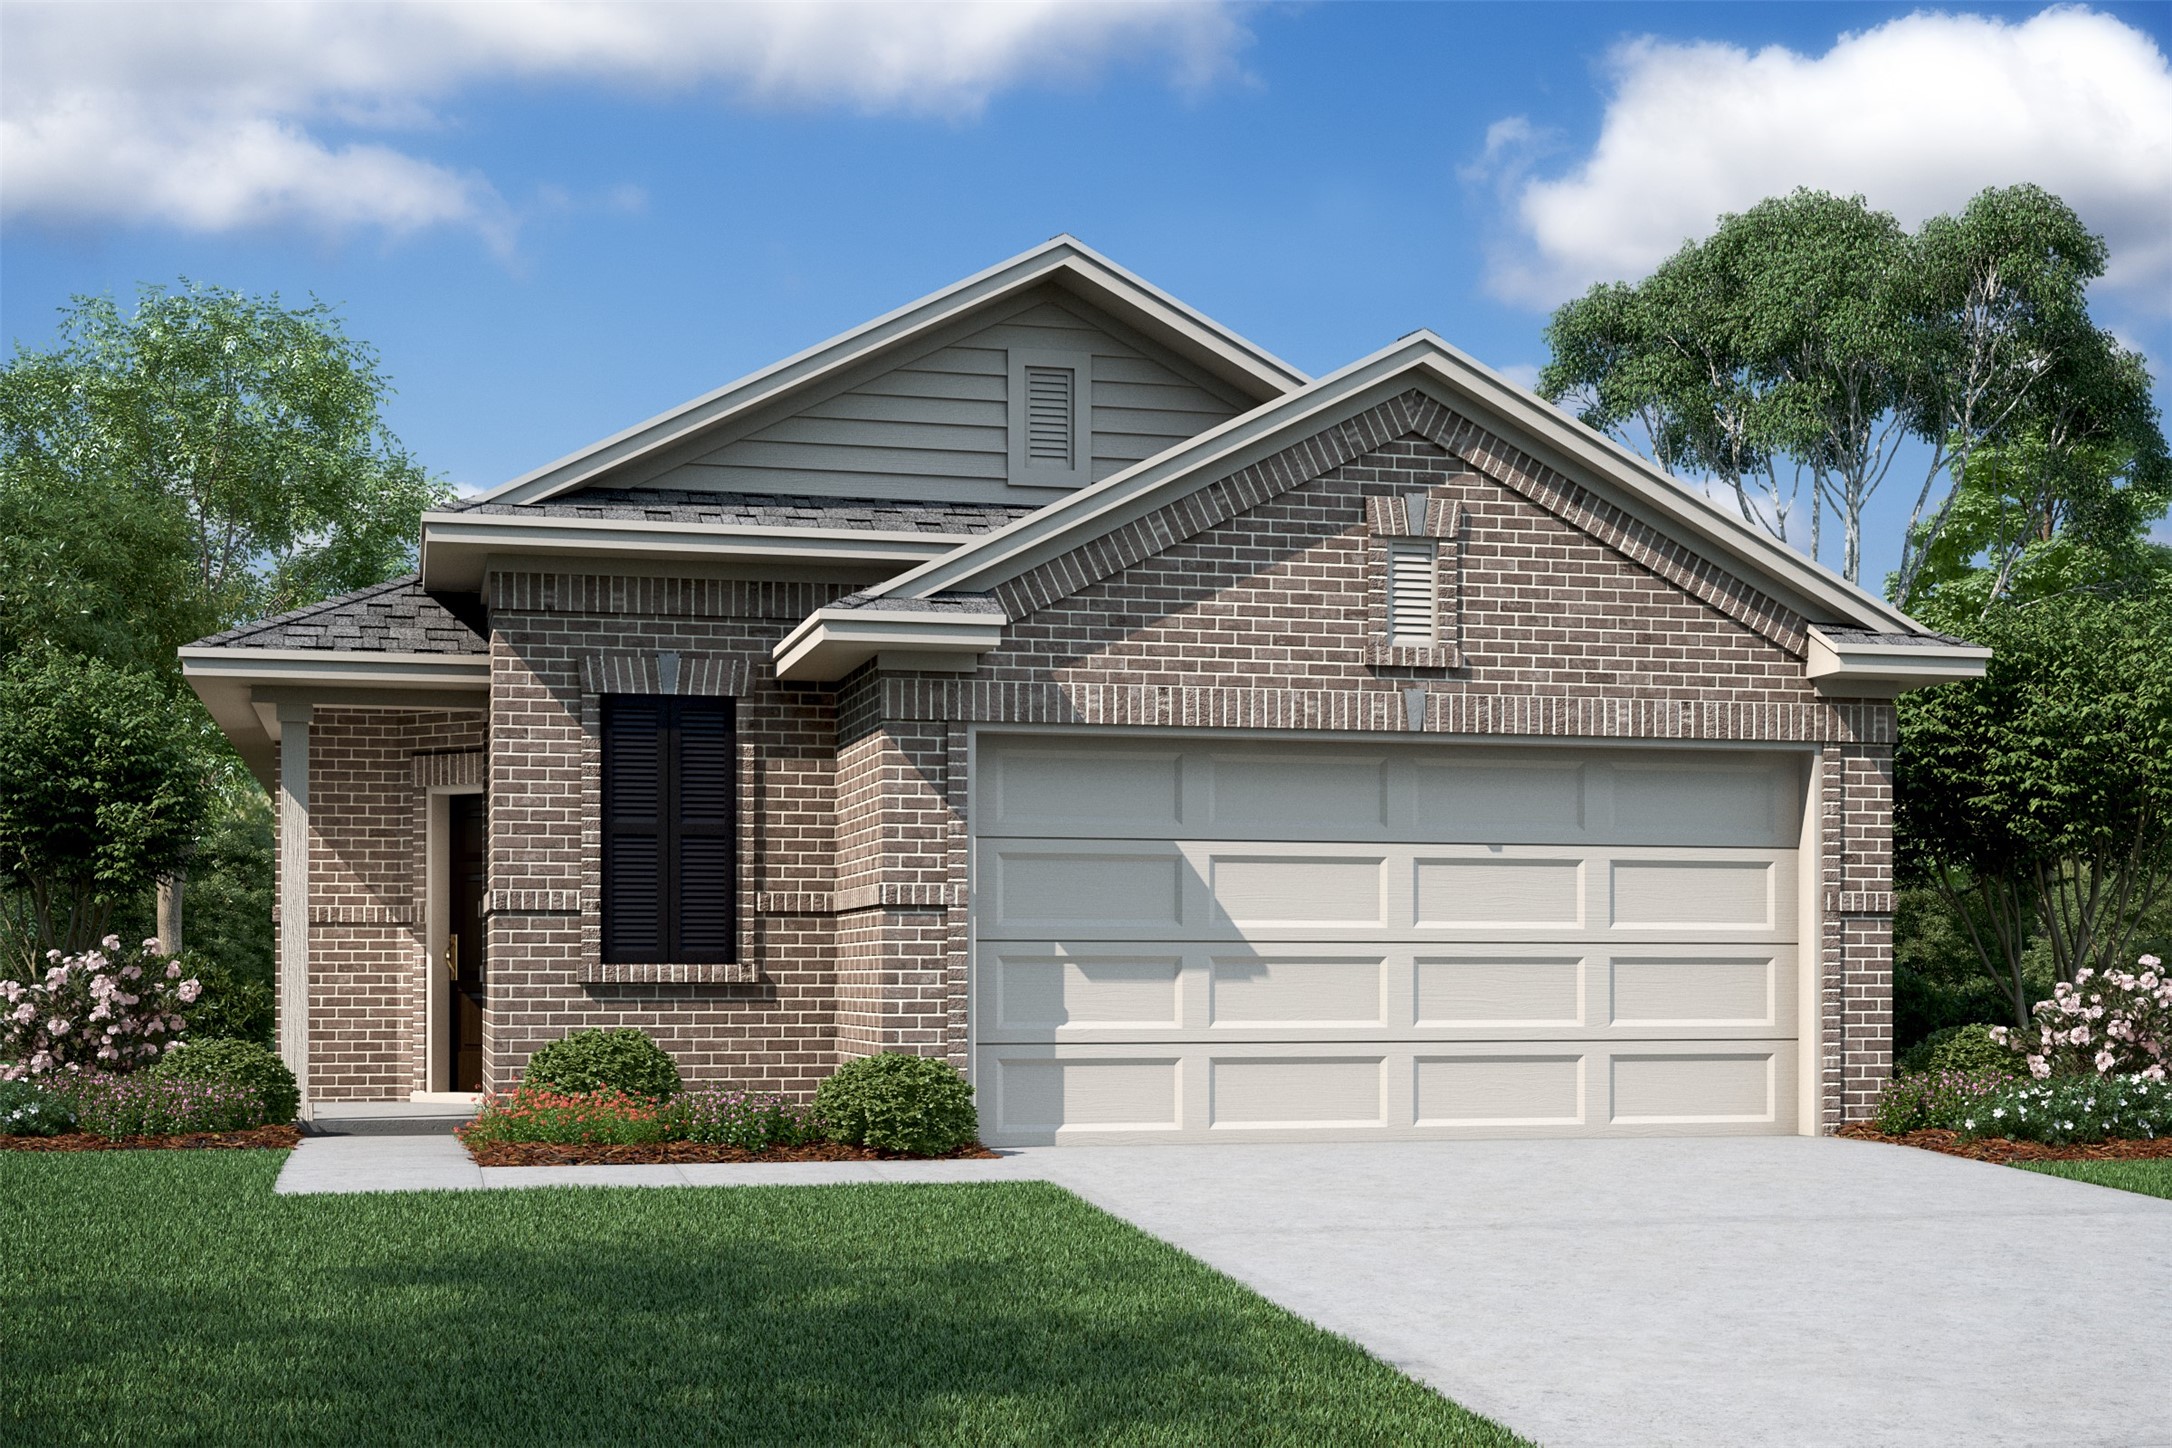 Stunning George home design by K. Hovnanian® Homes with elevation B in beautiful Willowpoint. (*Artist rendering used for illustration purposes only.)